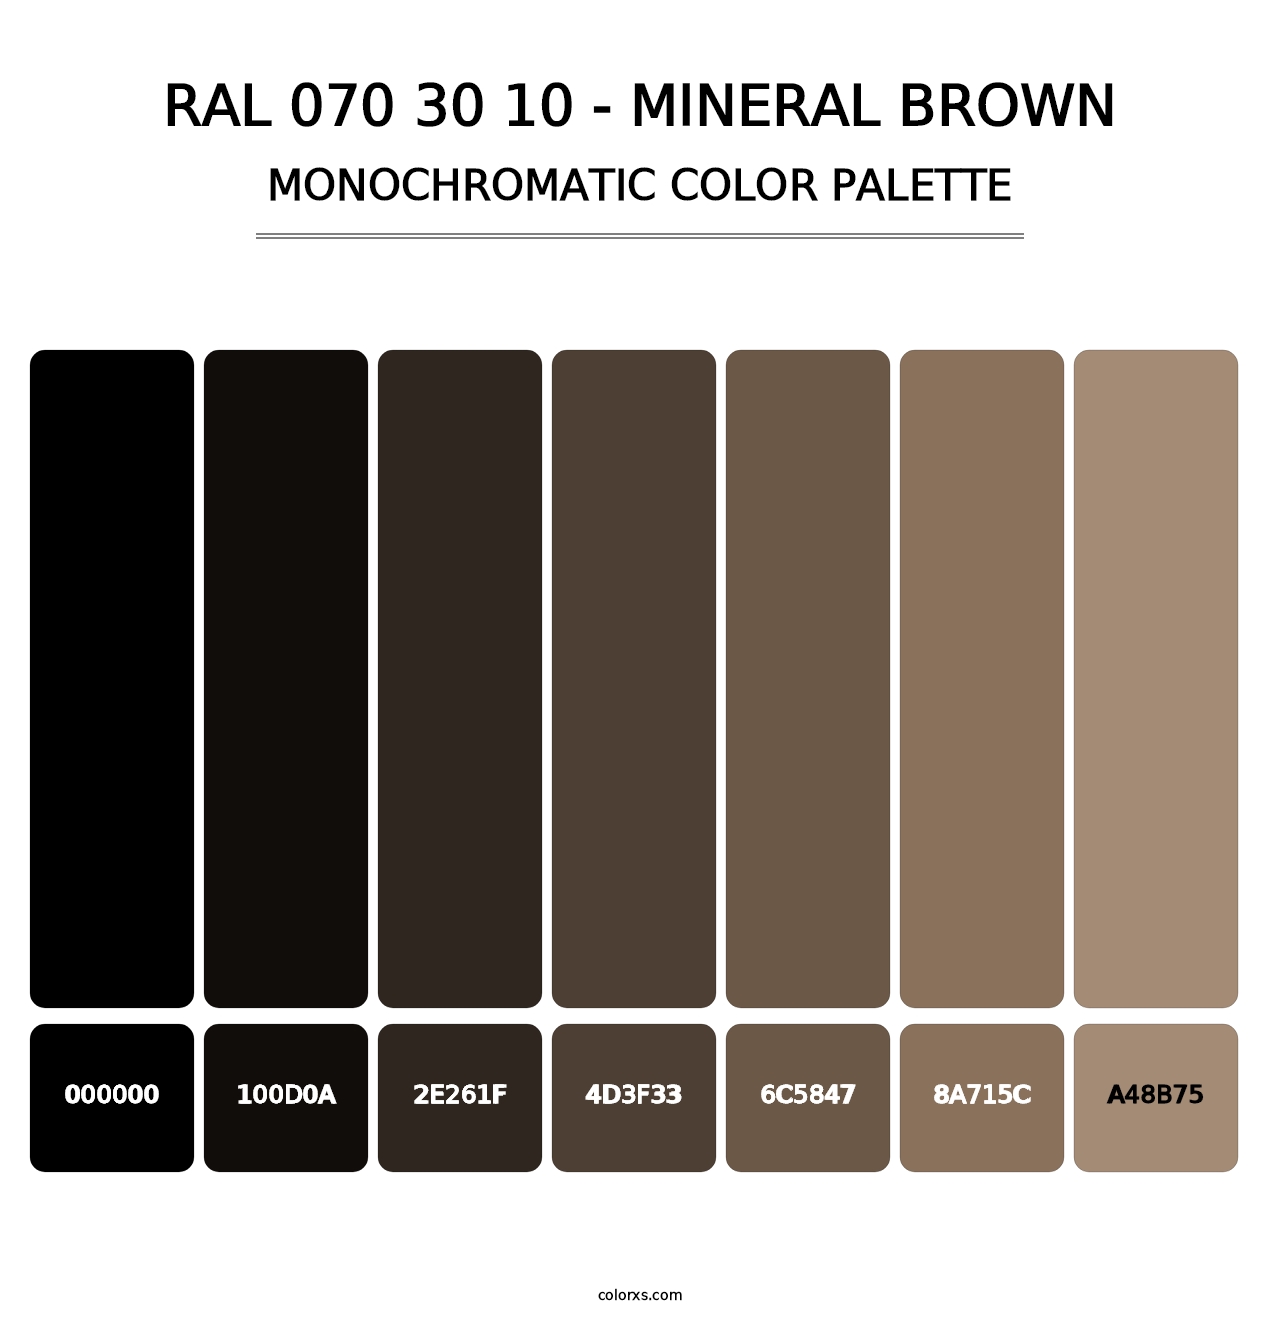 RAL 070 30 10 - Mineral Brown - Monochromatic Color Palette